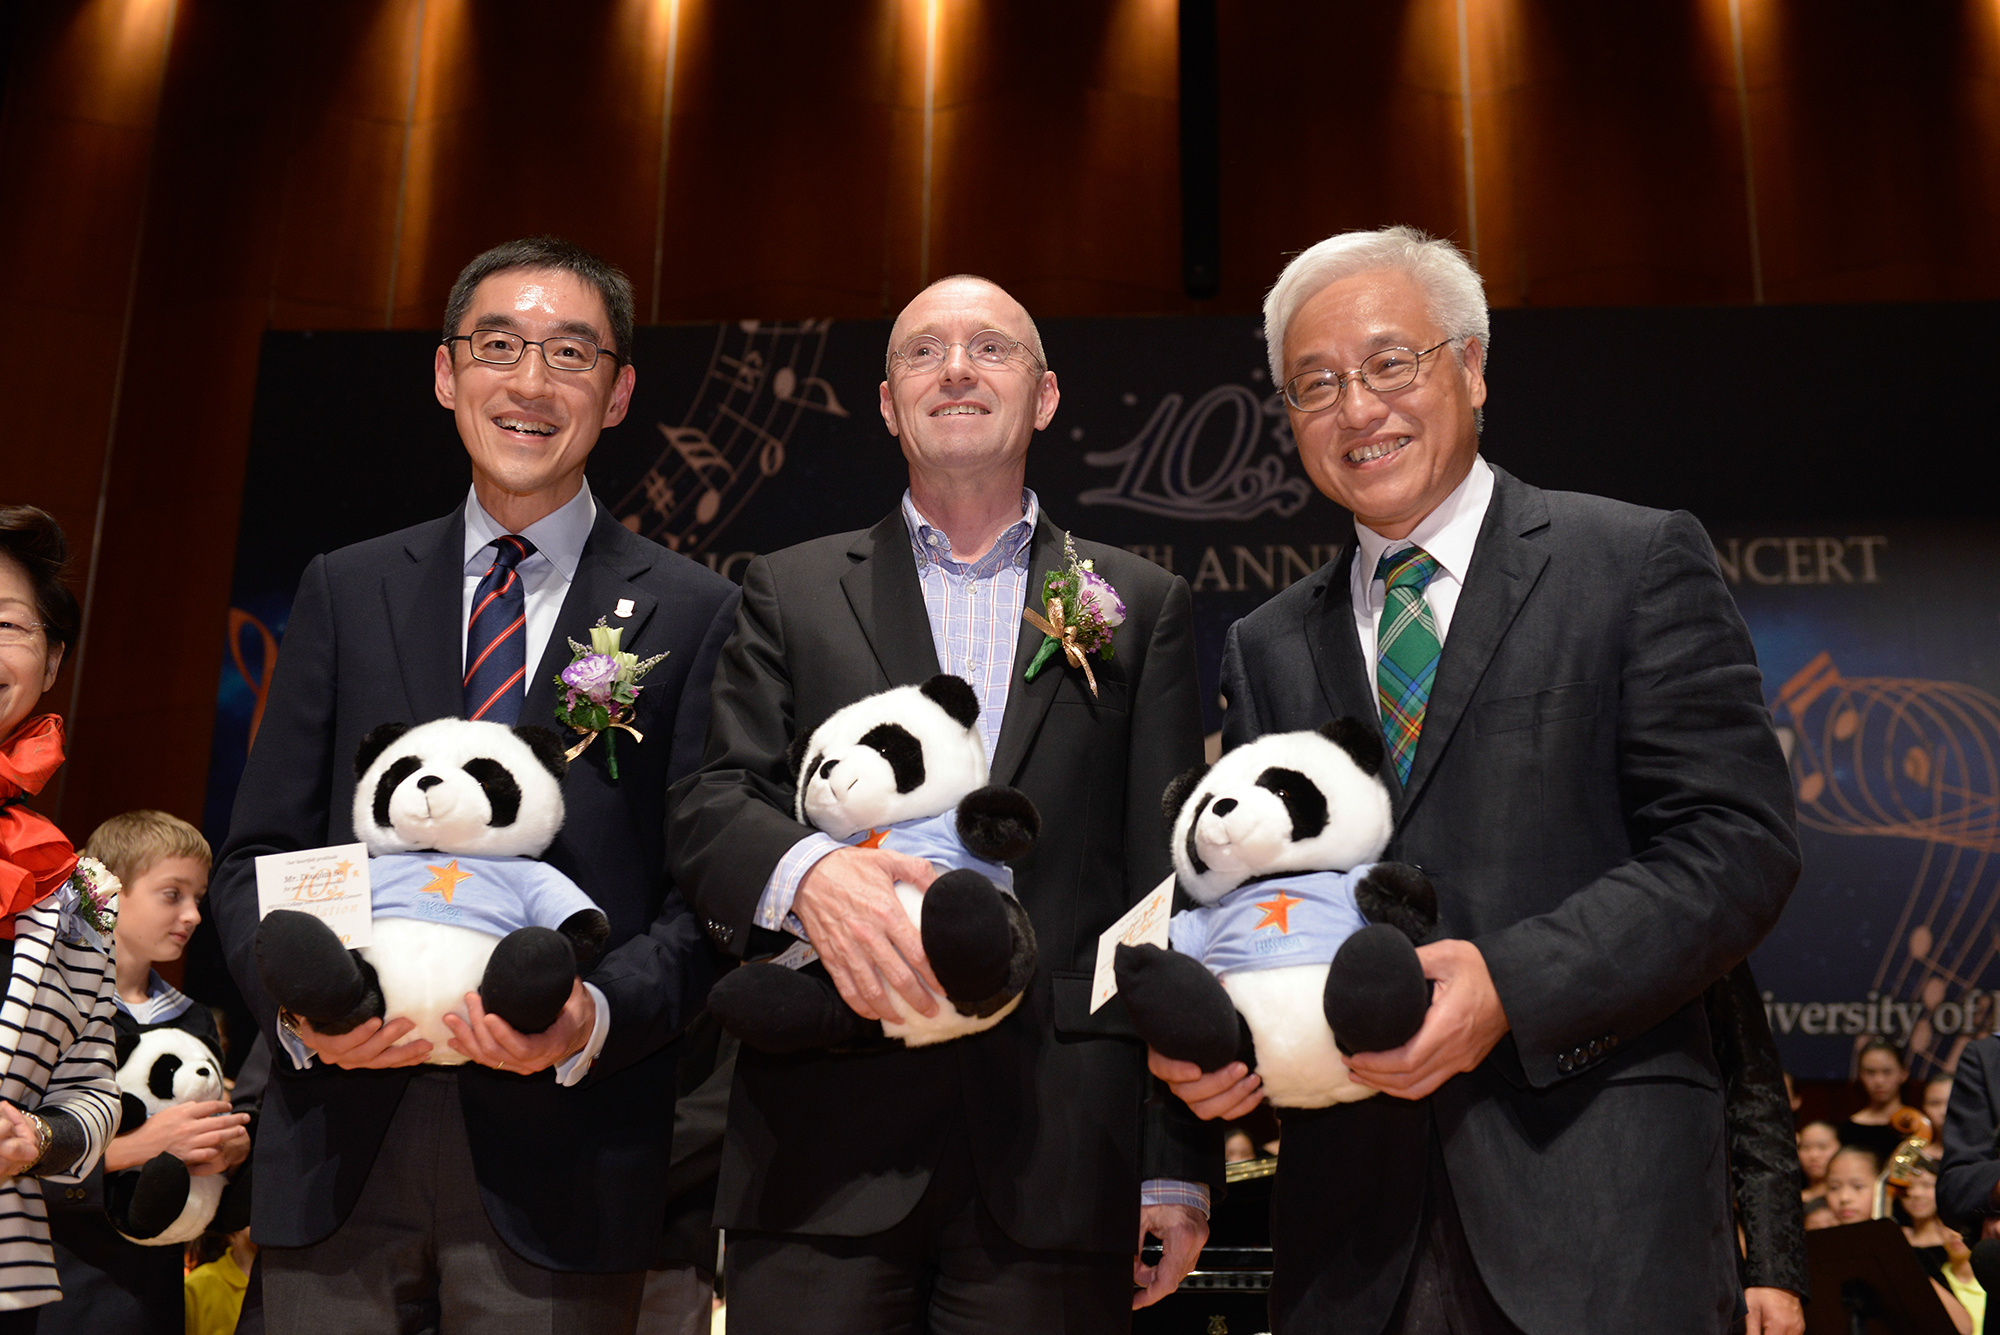 Guests of honours - from the left: Mr. Douglas So; Prof. Ian Holliday and Prof. Paul Tam.